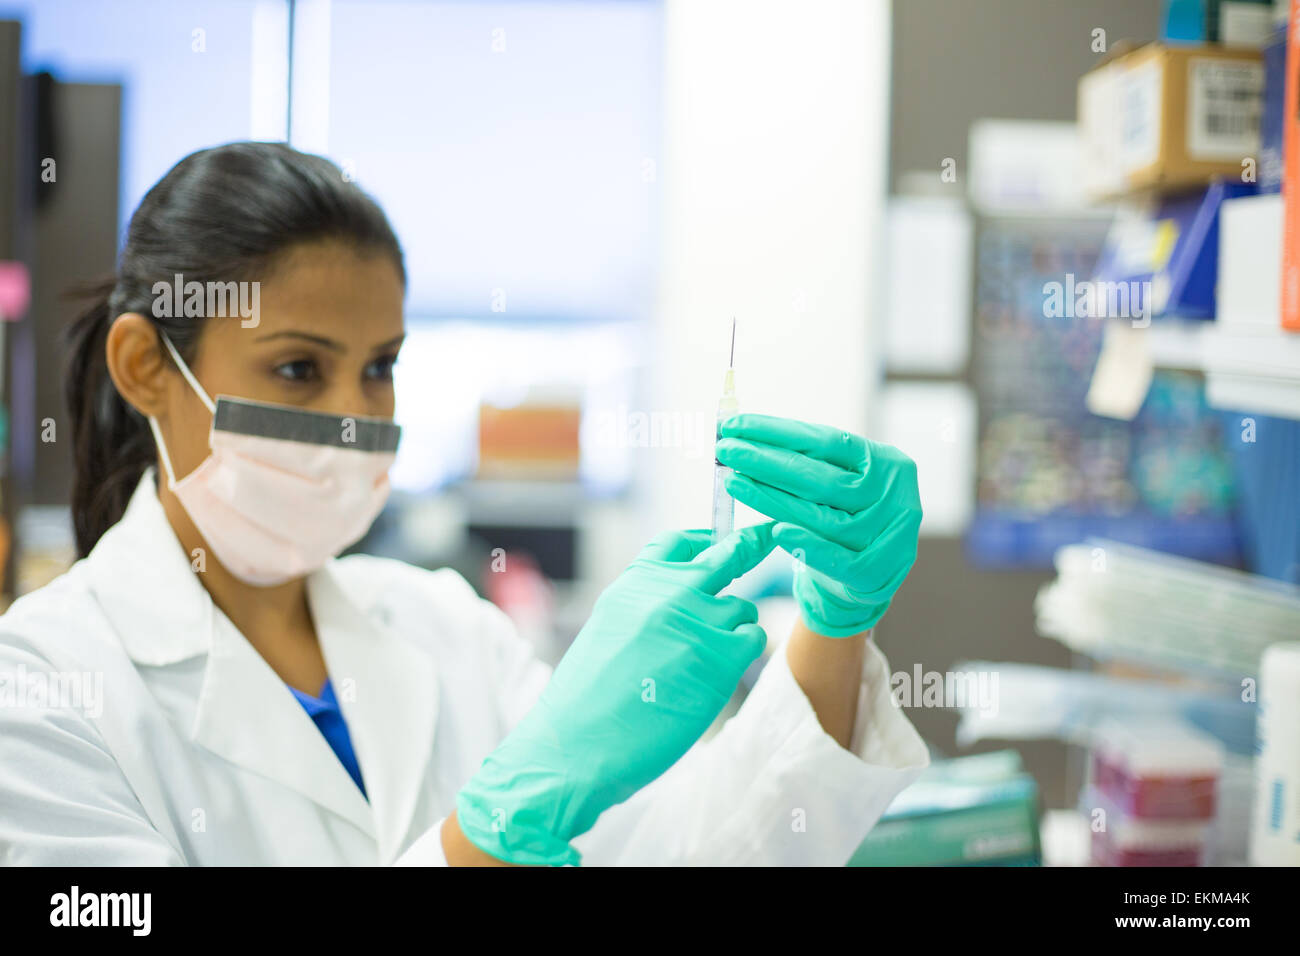 Closeup portrait, smart woman scientist in white labcoat, with face mask, holding syringe needle and flicking,isolated lab Stock Photo